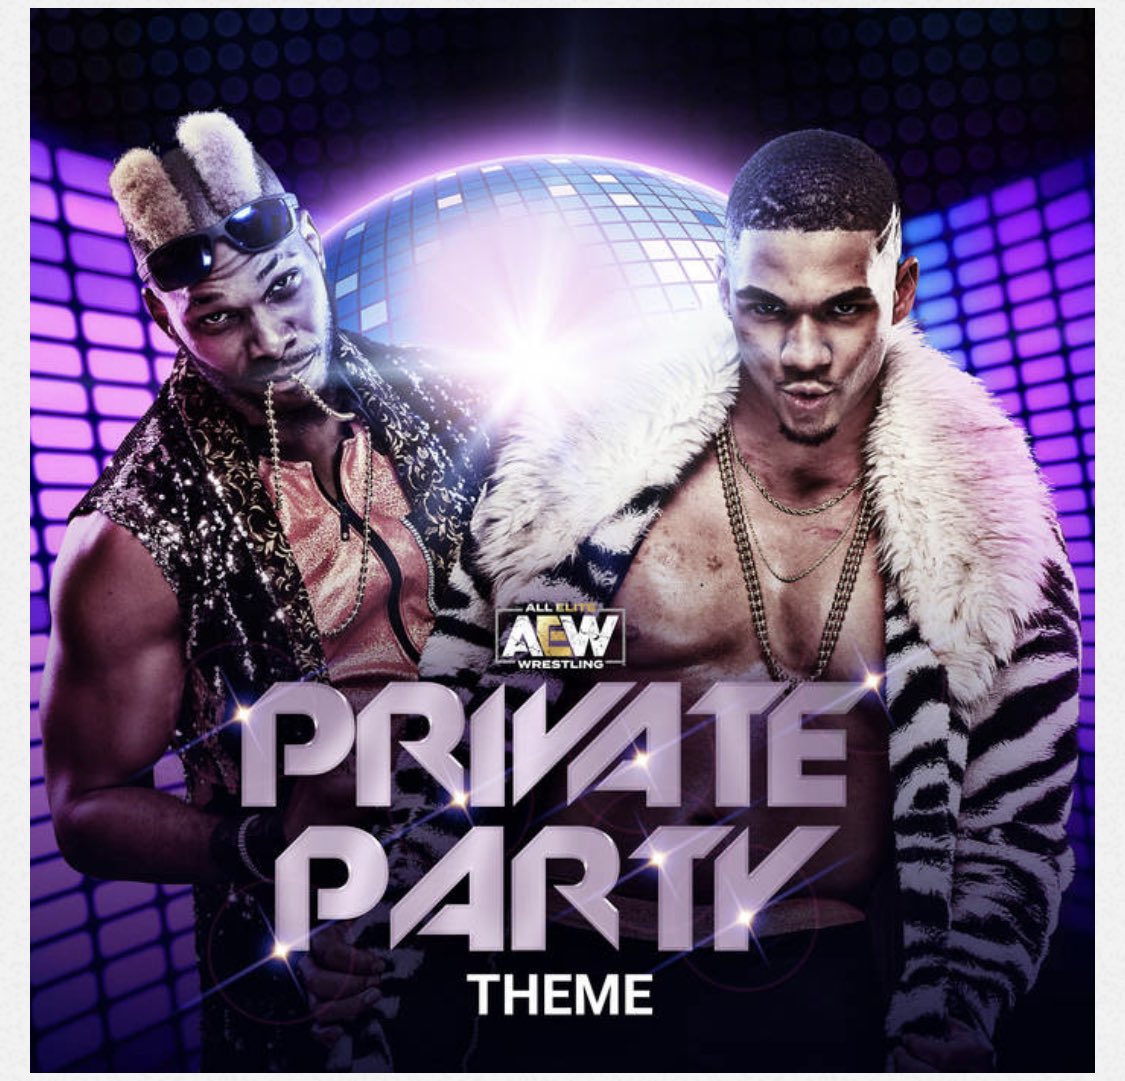 @IsiahKassidy @Marq_Quen They have the most Lit 🔥 intro and their ring work is top shelf! #PrivatePartyaew #aew #tagteam